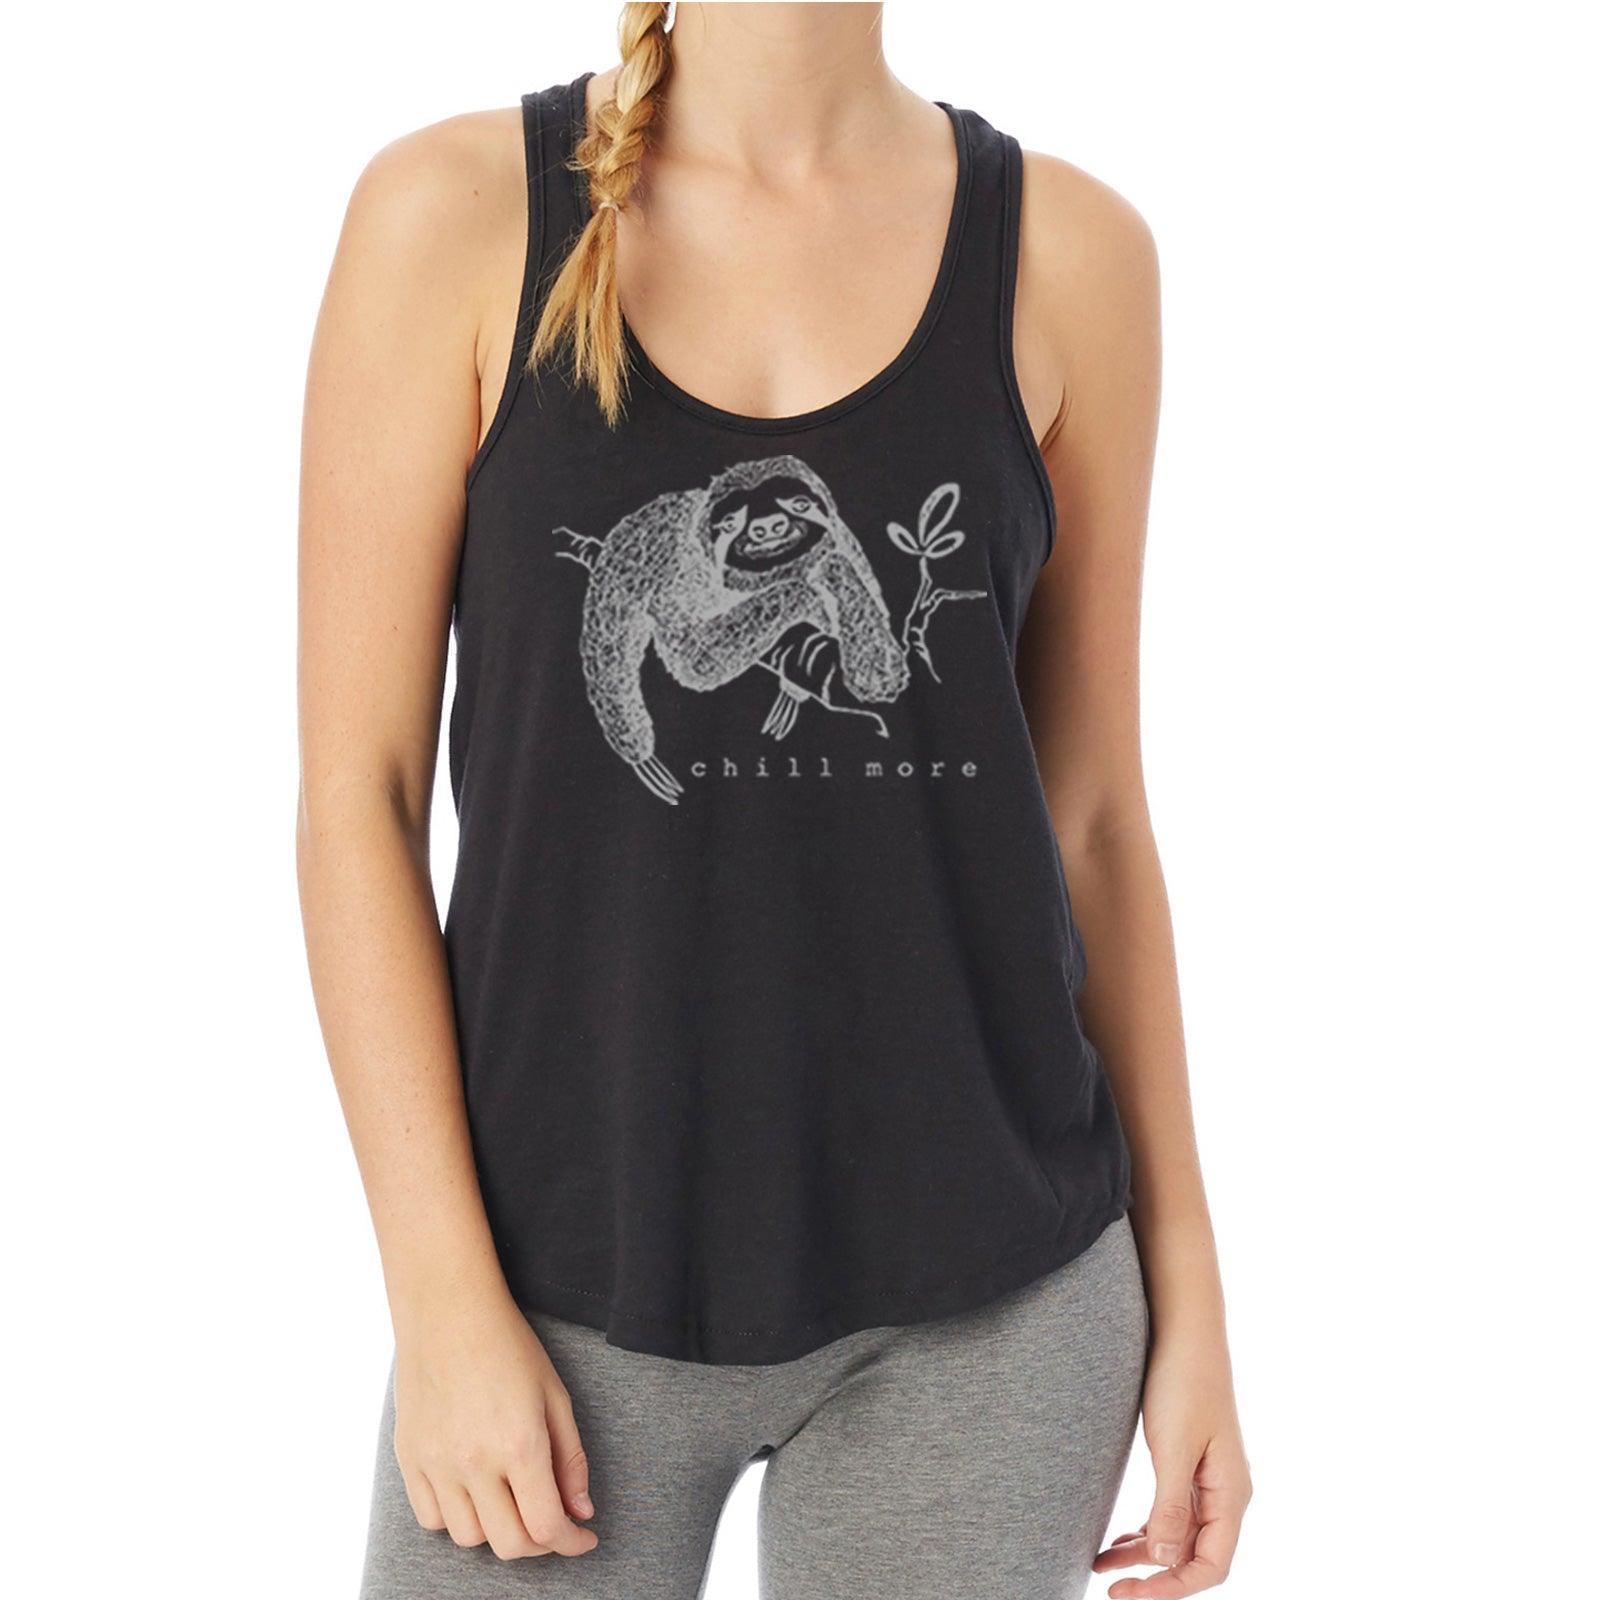 Sloth Vintage Jersey Tank Top for Women - Chill More Uni-T